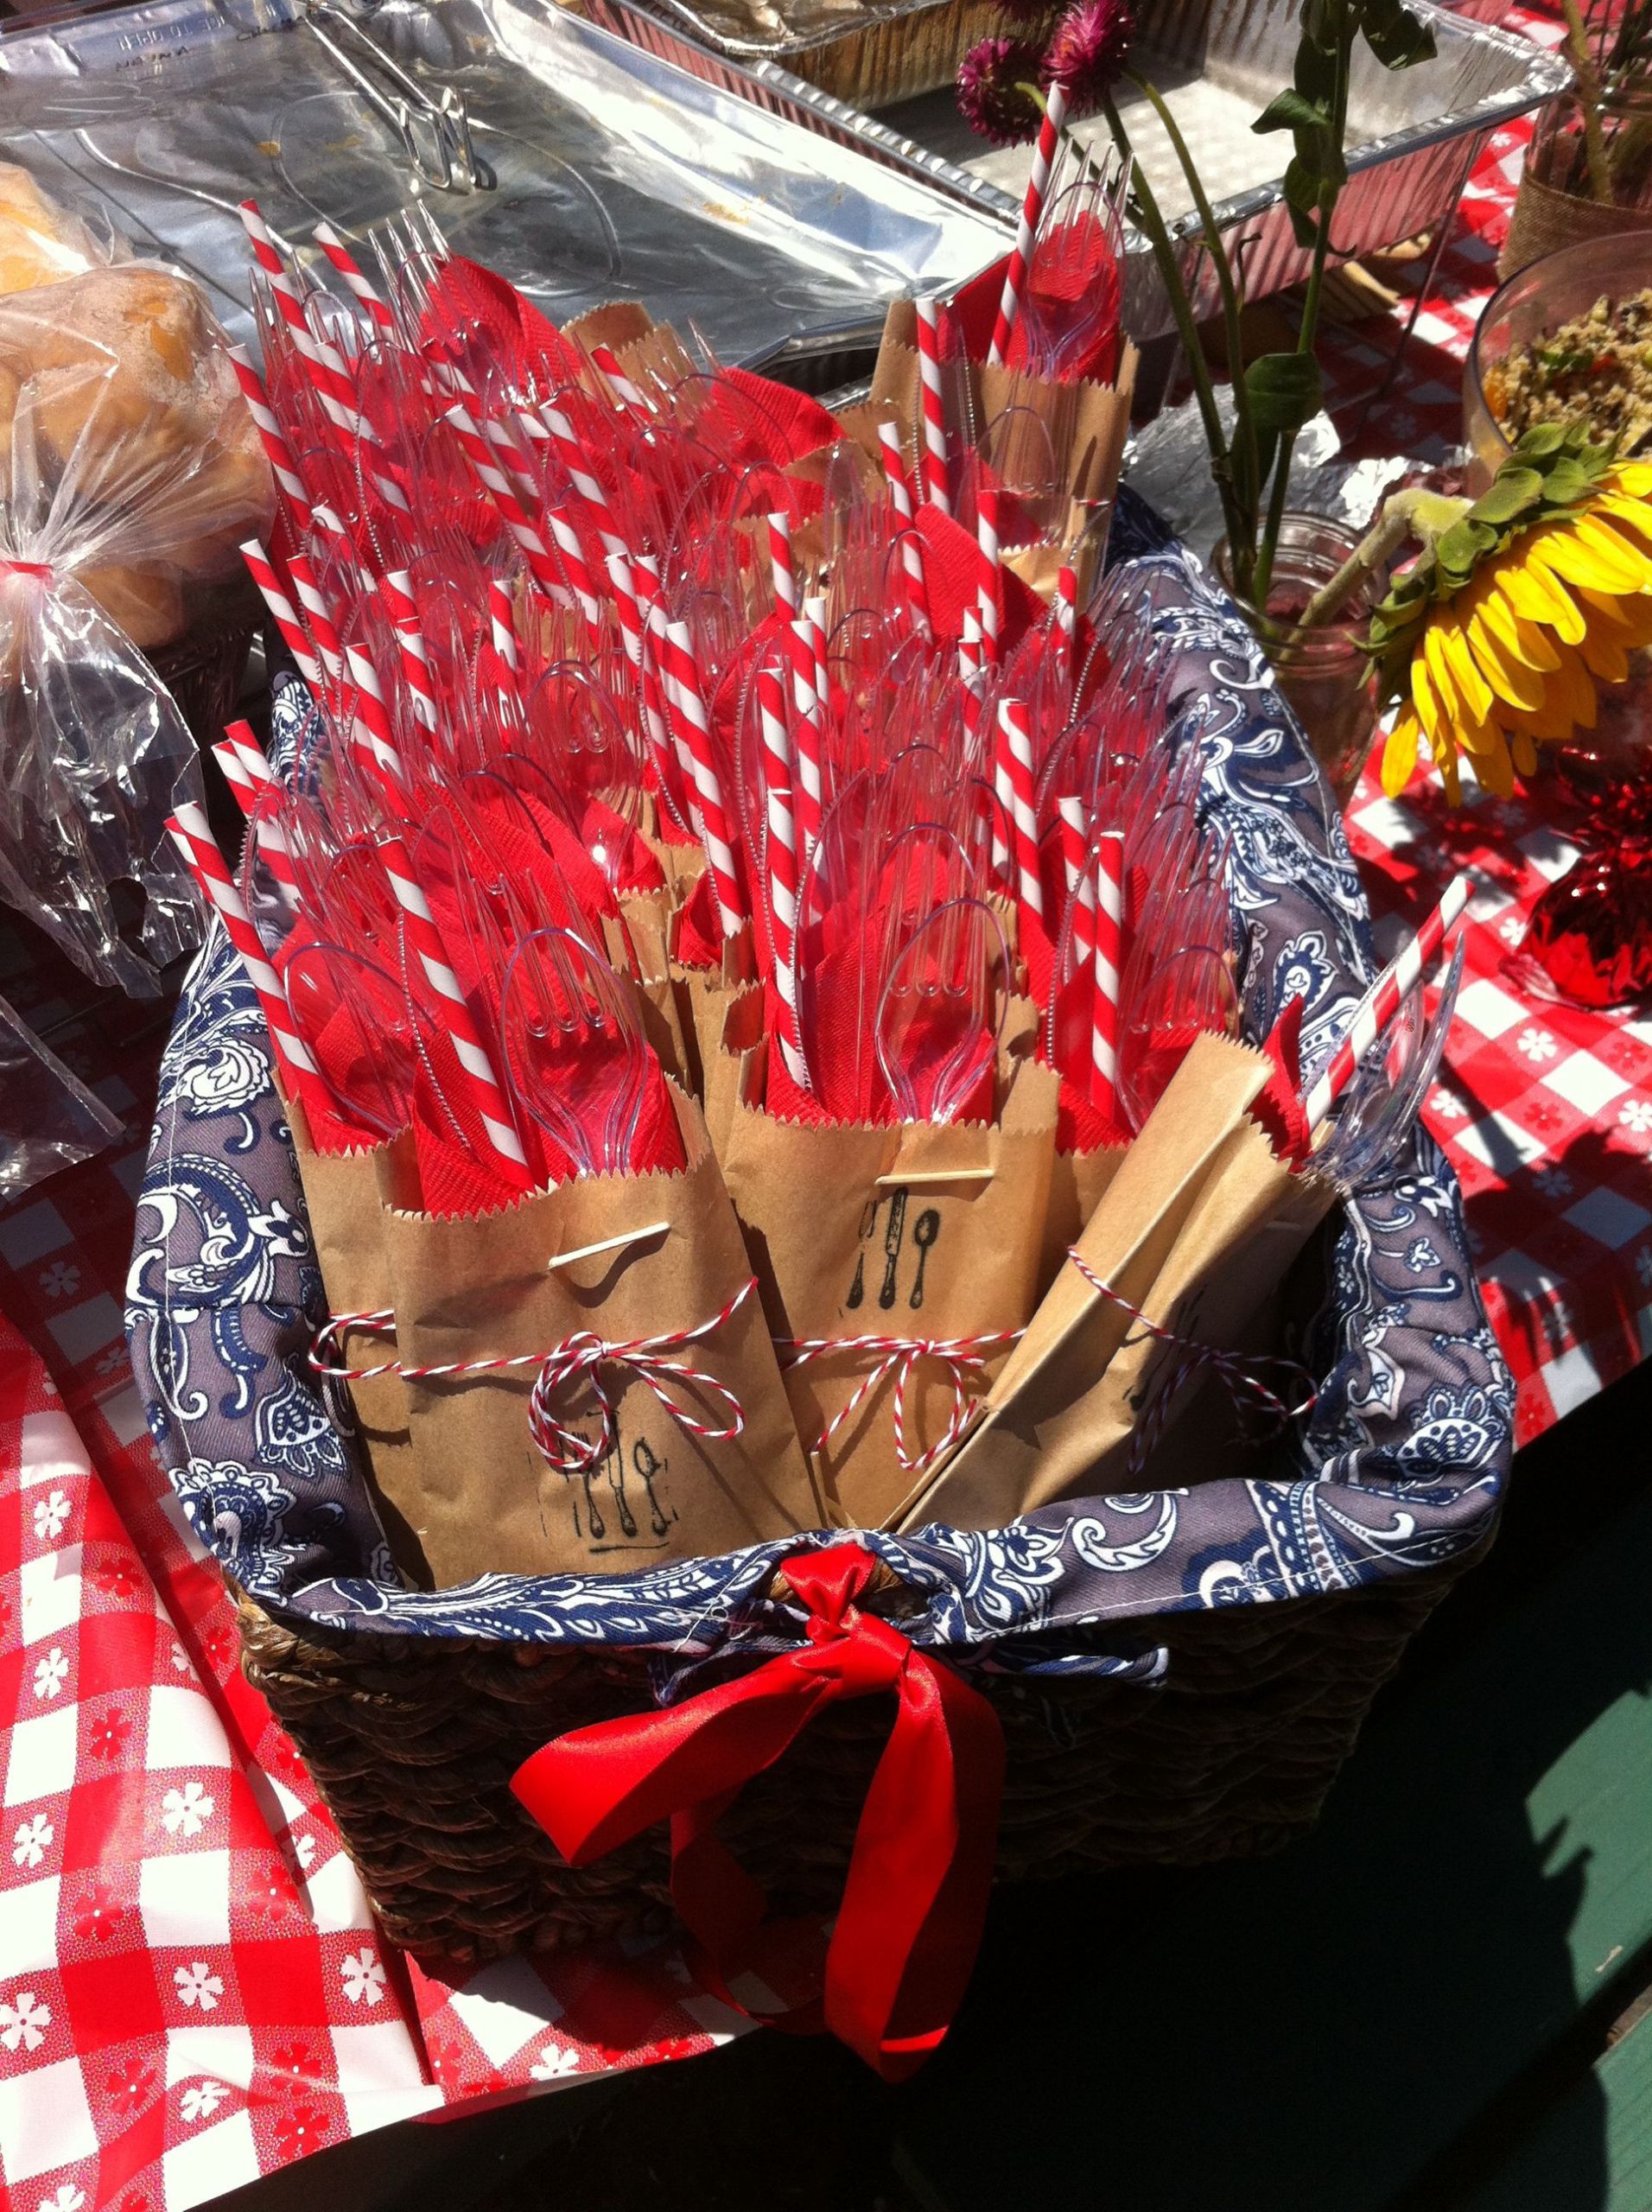 Picnic Graduation Party Ideas
 Utensil packets for sisters graduation BBQ picnic